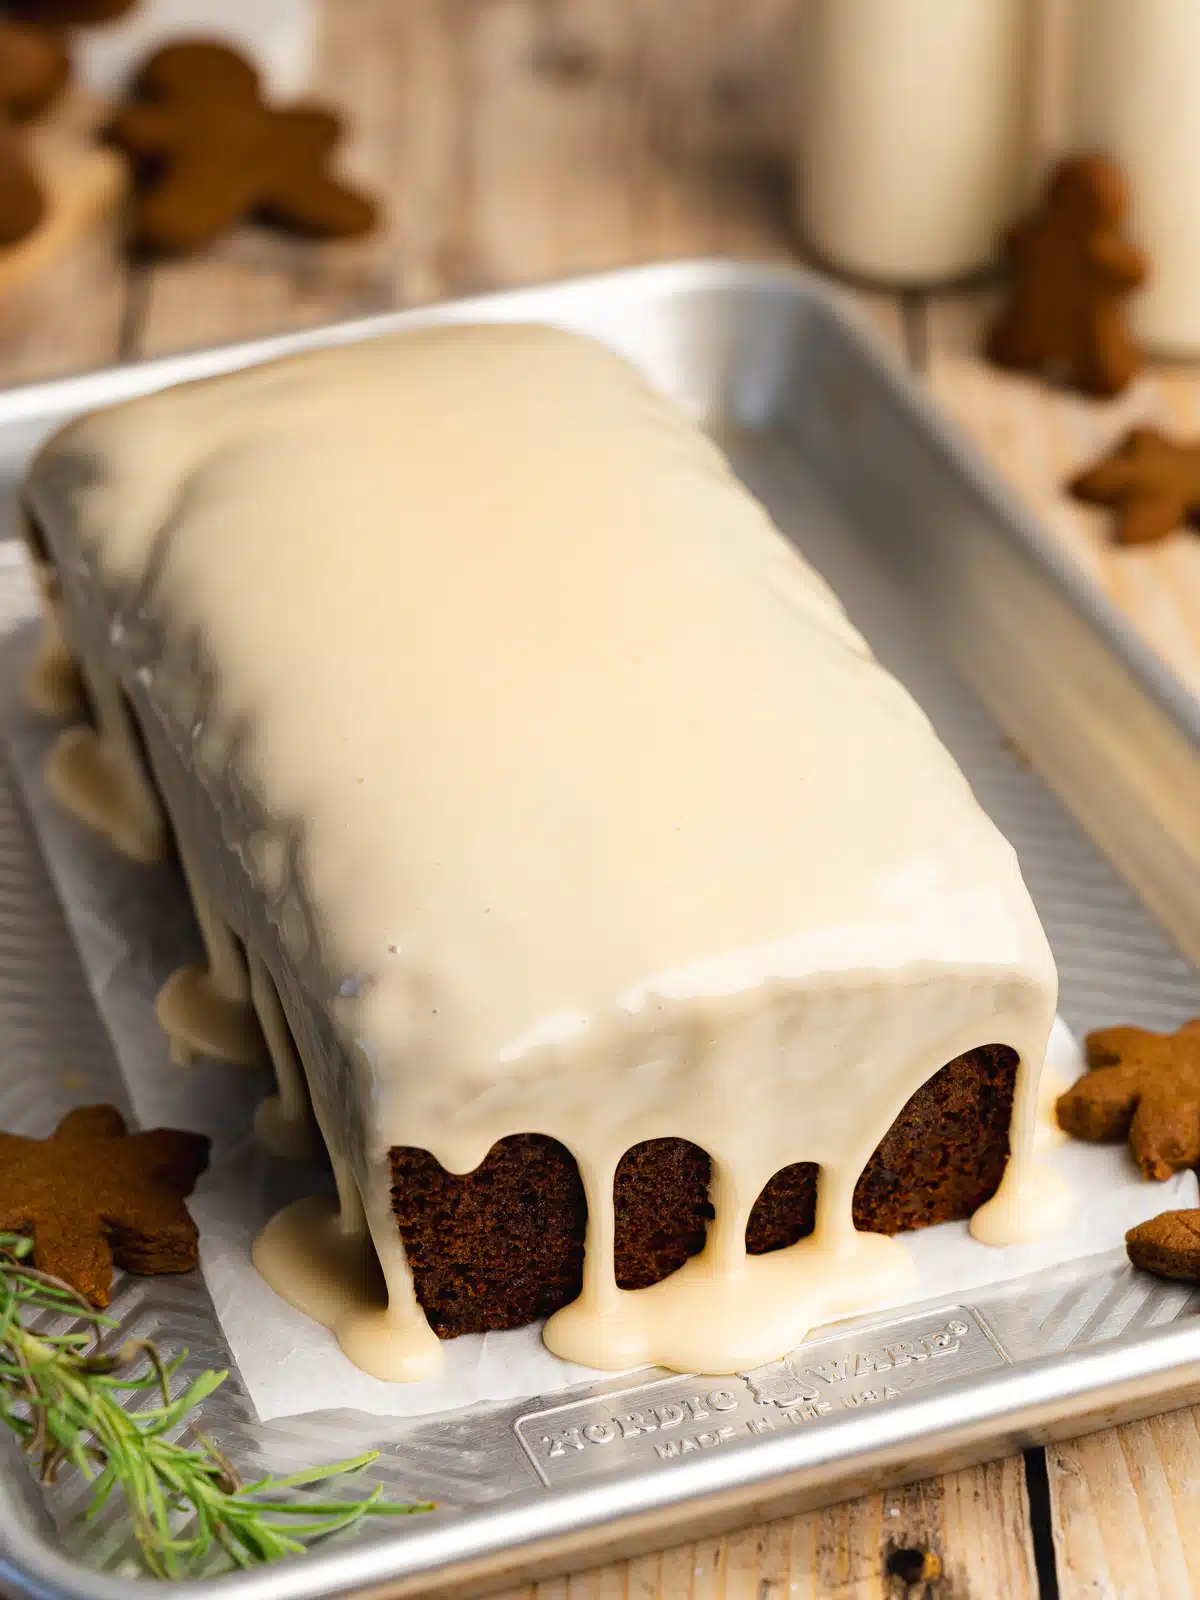 gingerbread loaf cake on a metal tray with cream cheese icing poured on top, and dripping down the sides.